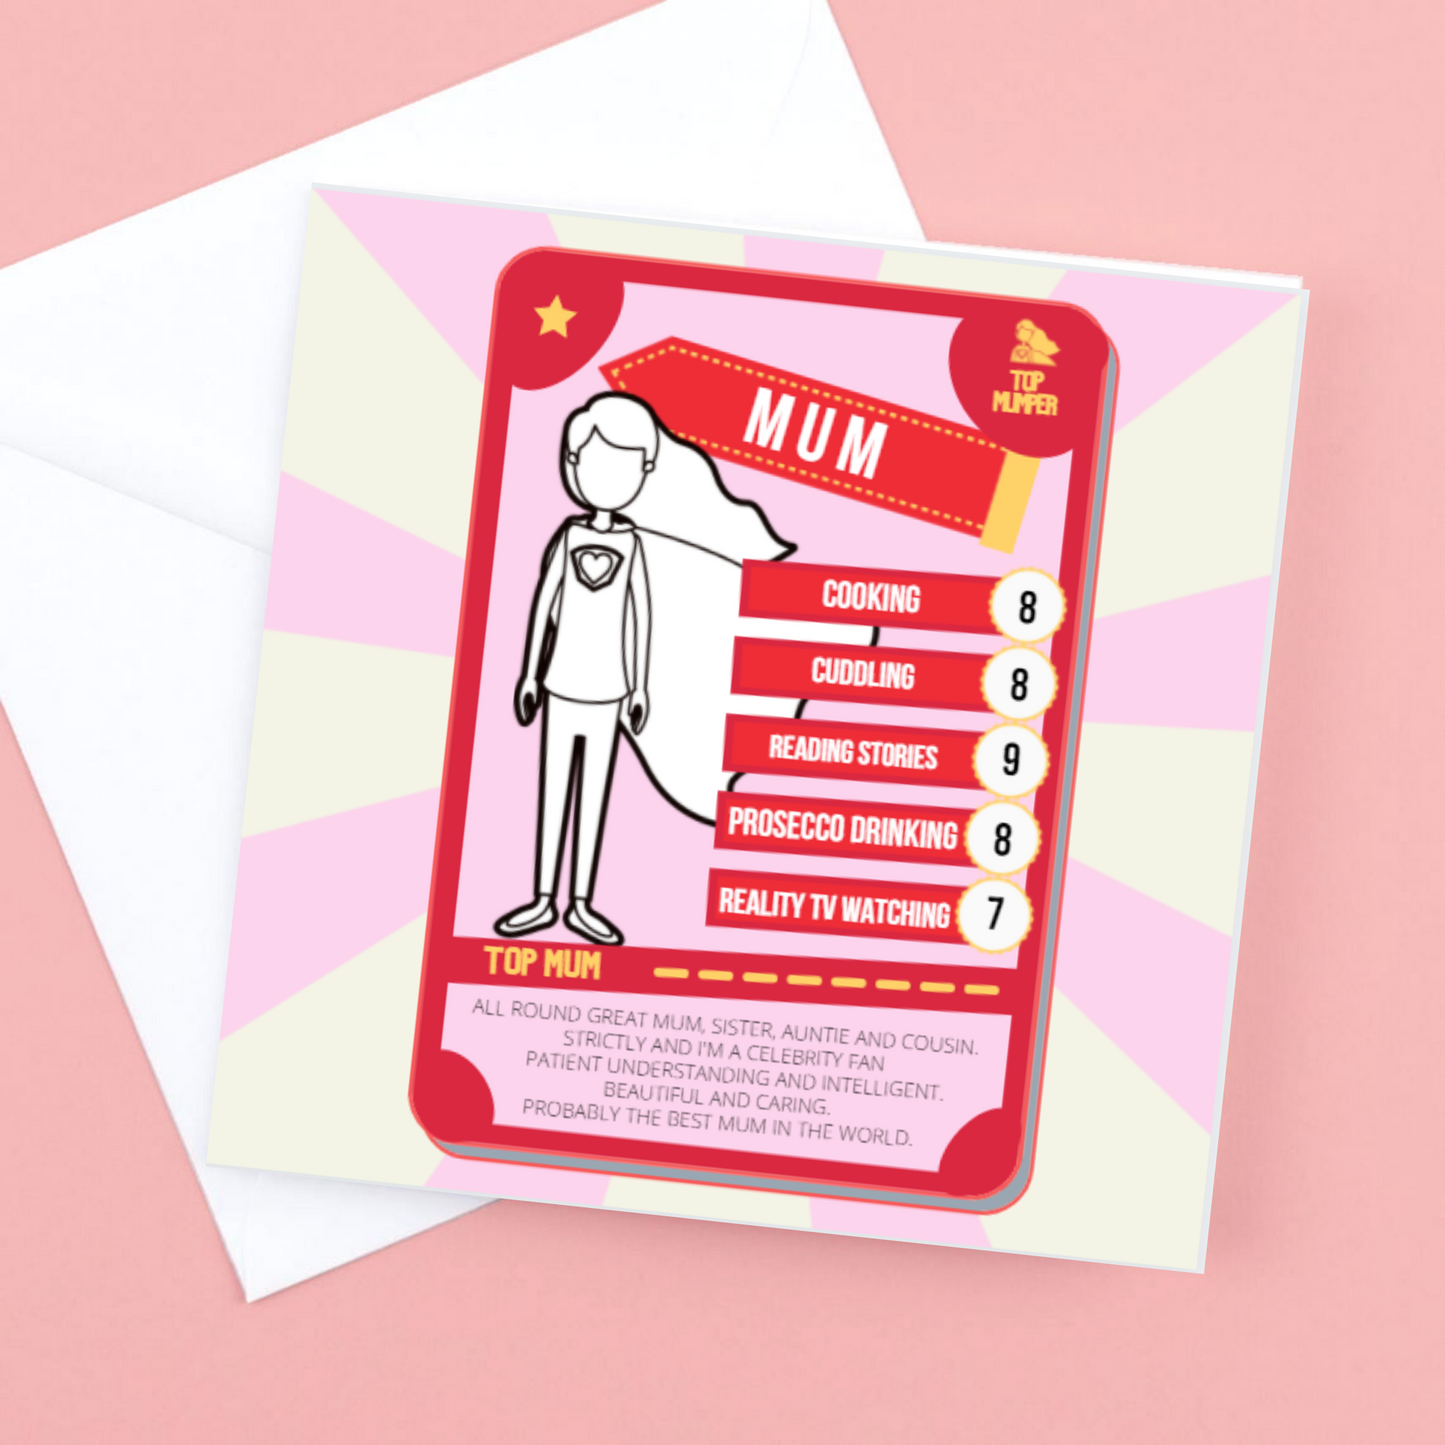 Mum Top Mumper Card - personalise all qualities and numbers